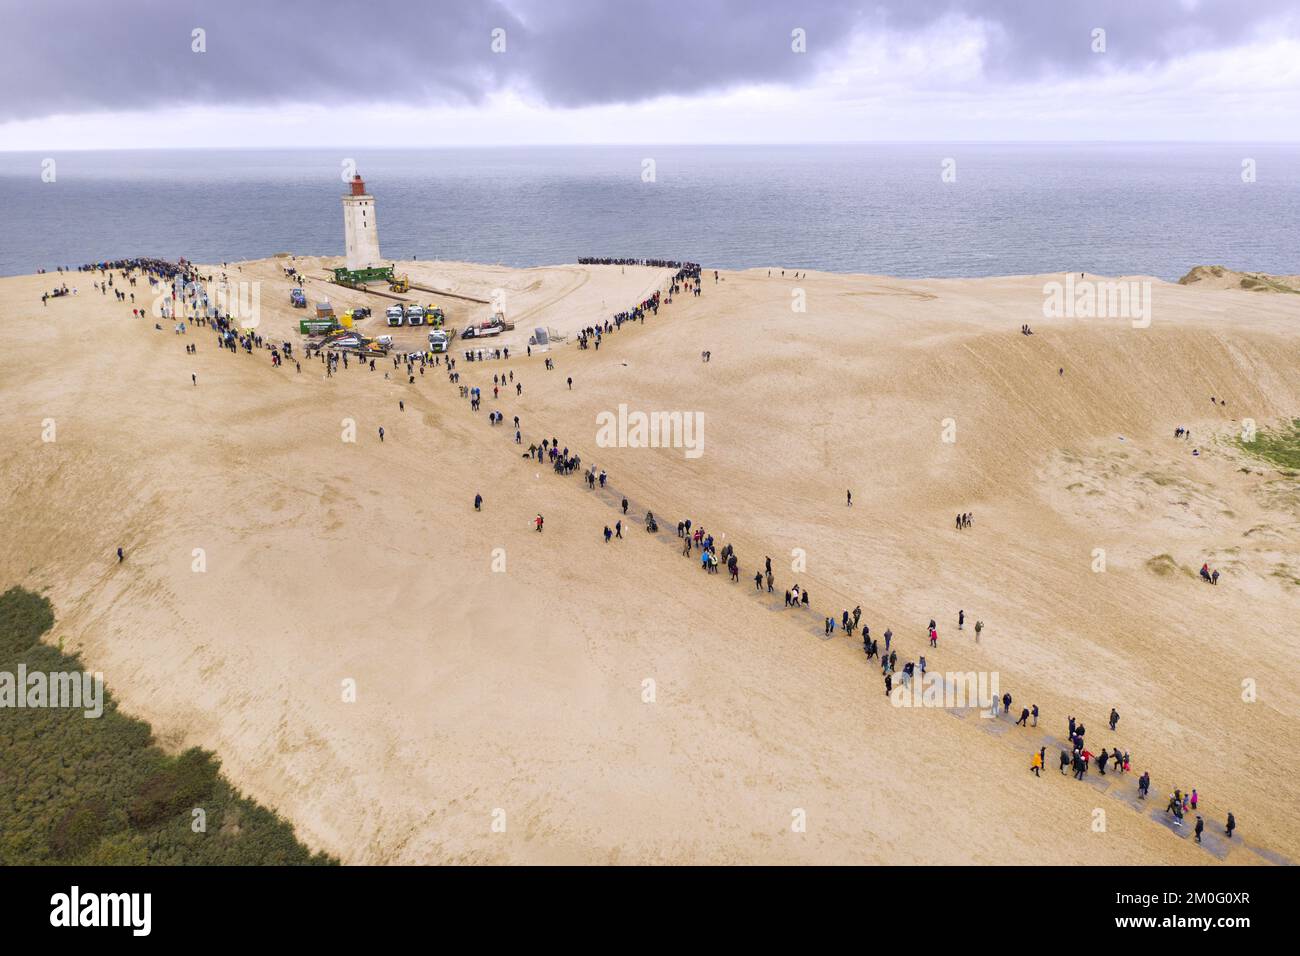 Rubjerg Knude Lighthouse moves on 'roller skates' and metal rails in Loenstrup, North Jutland, Denmark, on Tuesday, October 22, 2019. The 23 meter high and 120 year old Lighthouse is moved approx. 70 meters inland. The Lighthouse had to be moved because the waves of the sea annually eat about two to four meters of the coast in front of the lighthouse. If the lighthouse were not moved, it would crash into the sea in five to ten years. Stock Photo